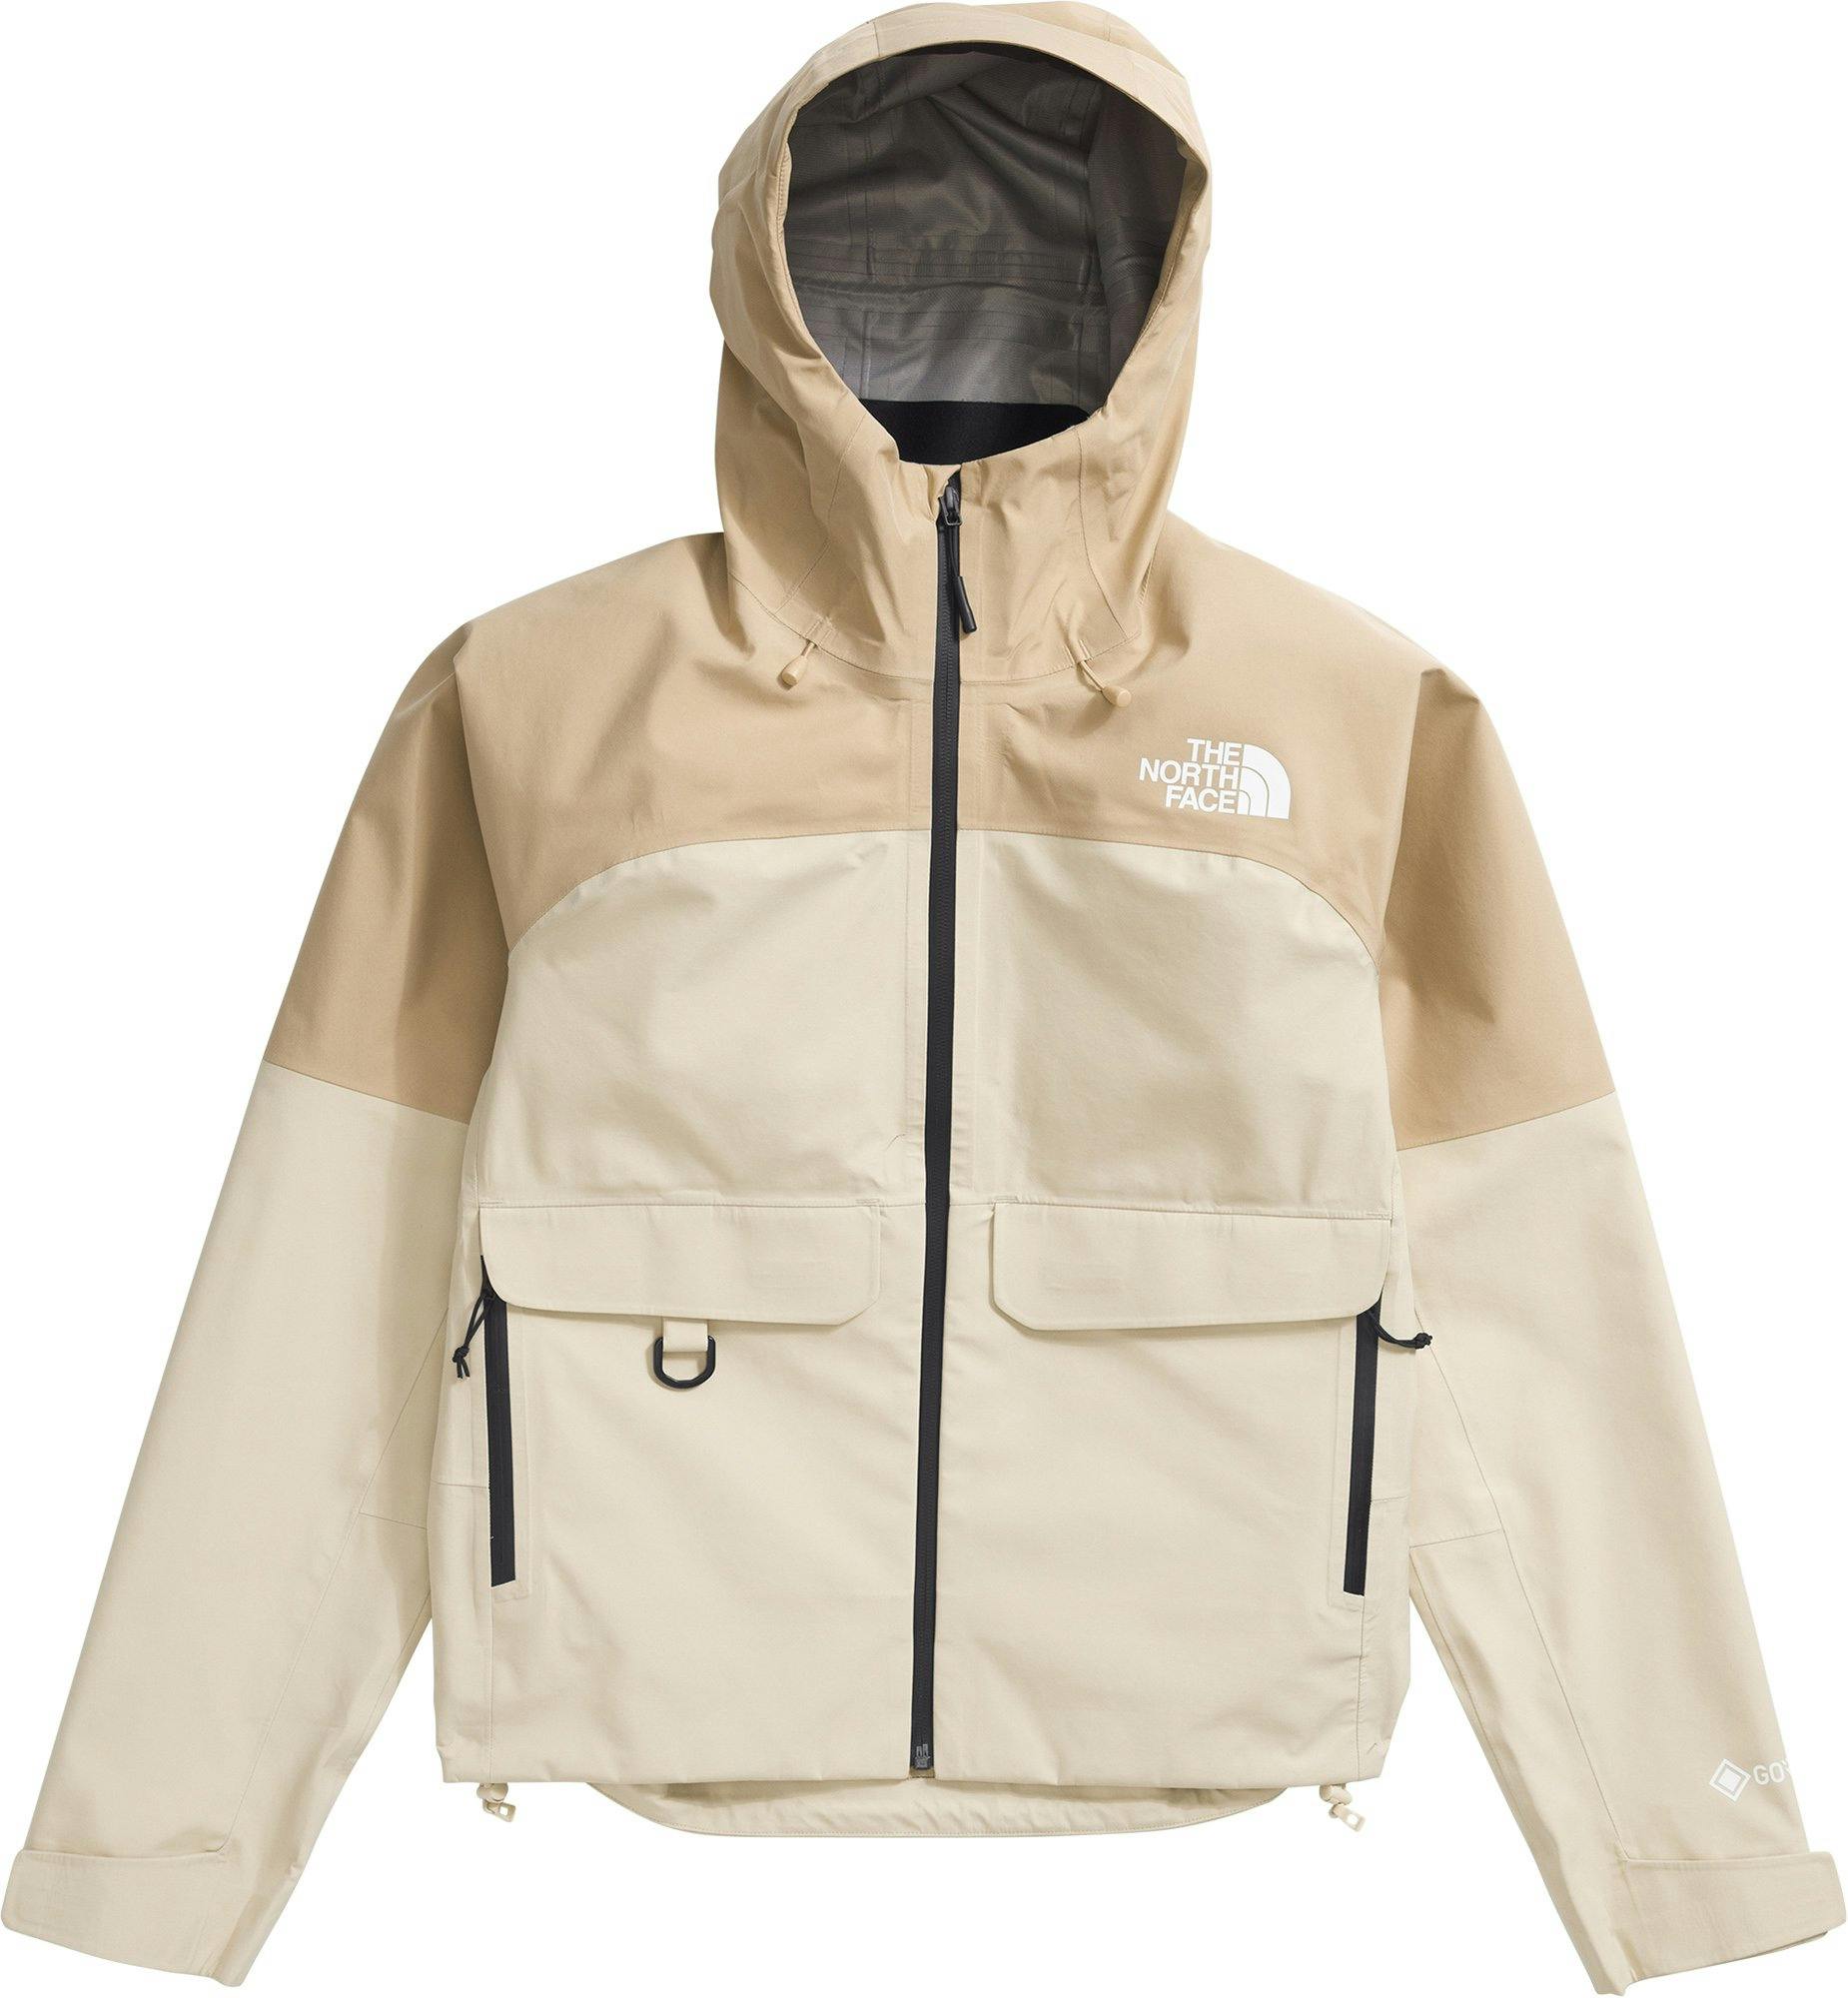 Product image for Devils Brook Gore-Tex Jacket - Women’s